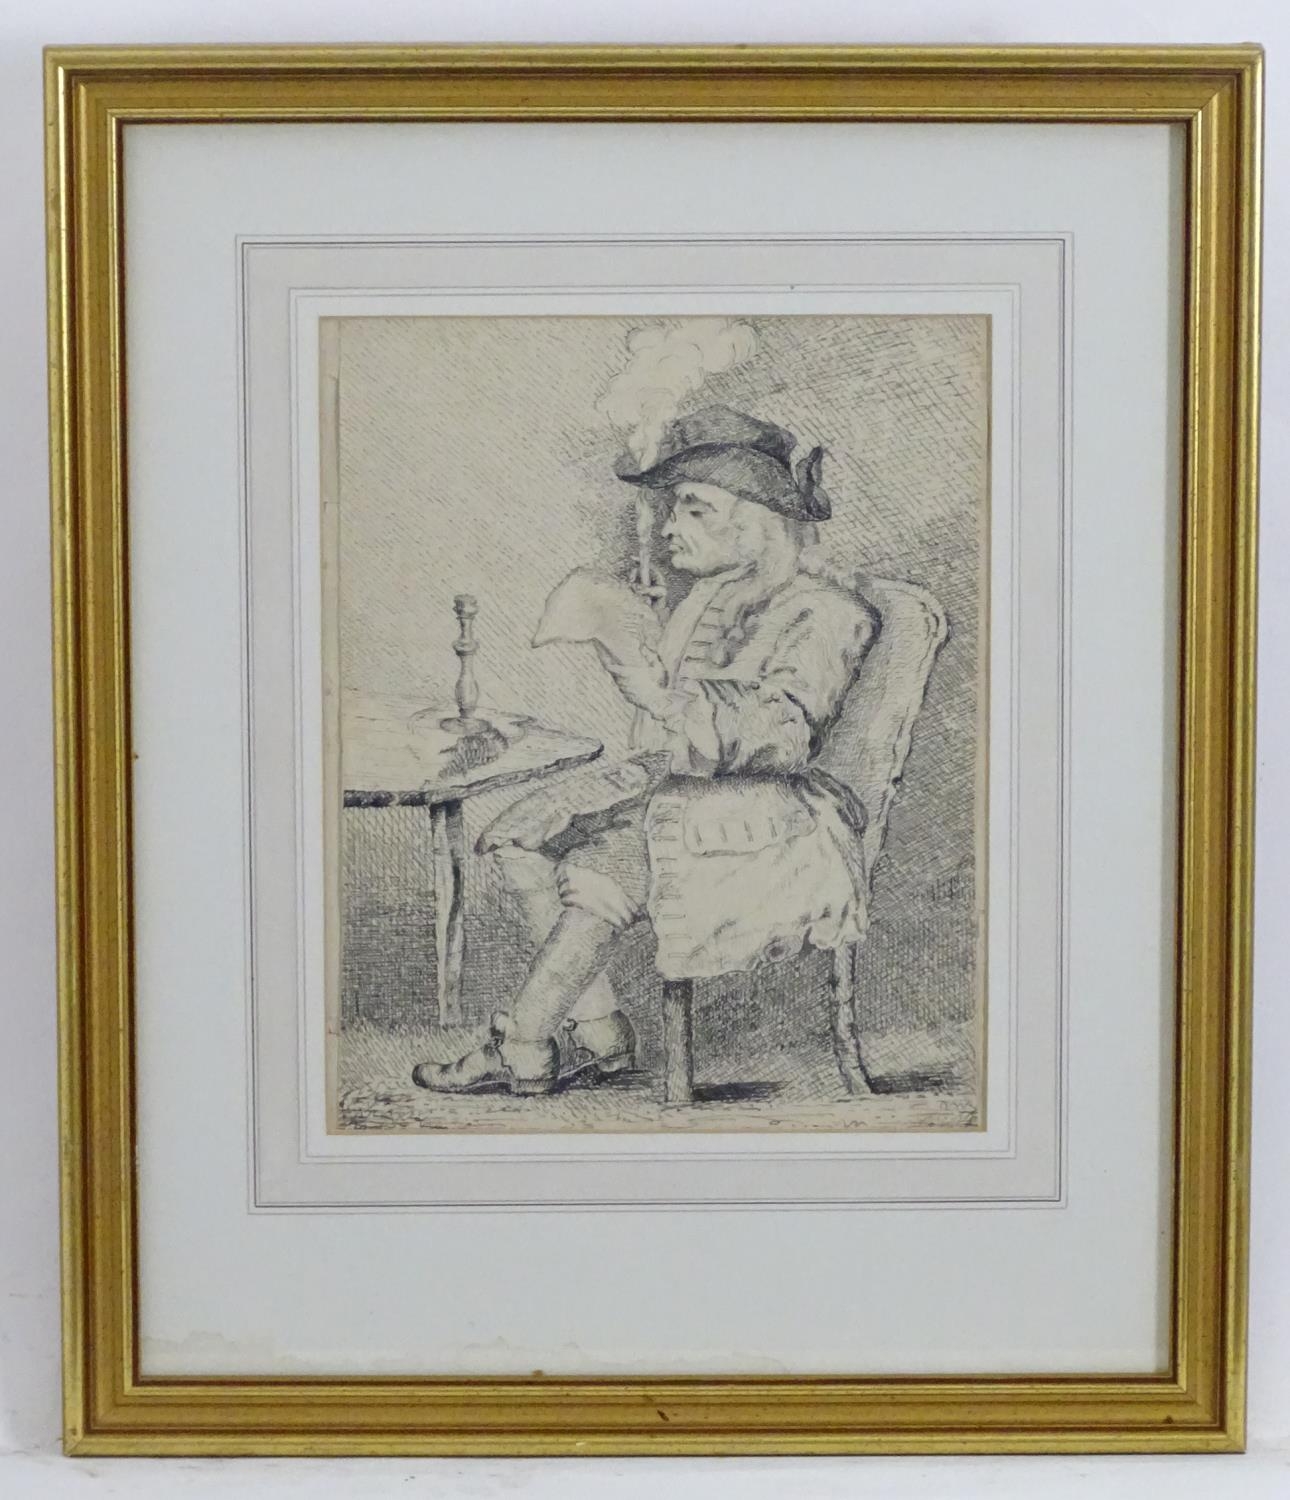 After William Hogarth (1697-1764), 19th century, Pen and ink, The Politician, A portrait of a